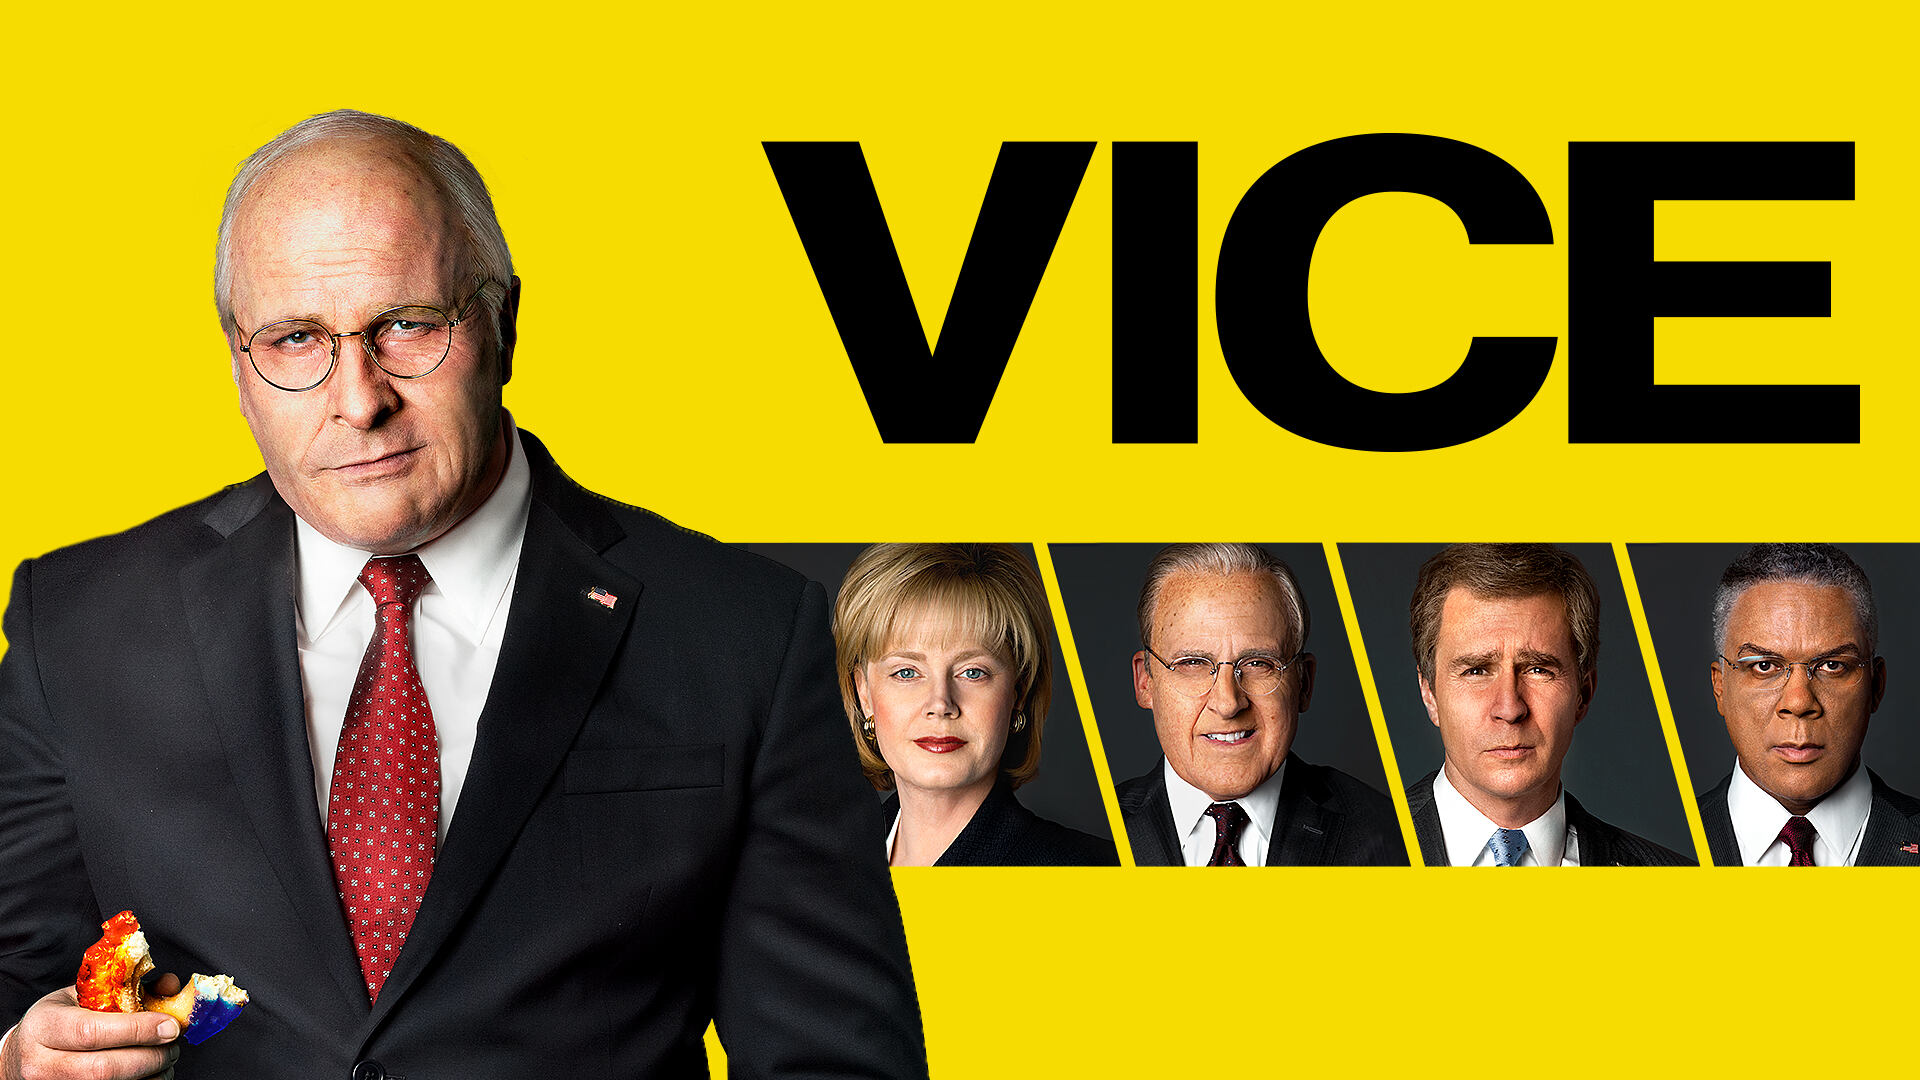 44-facts-about-the-movie-vice